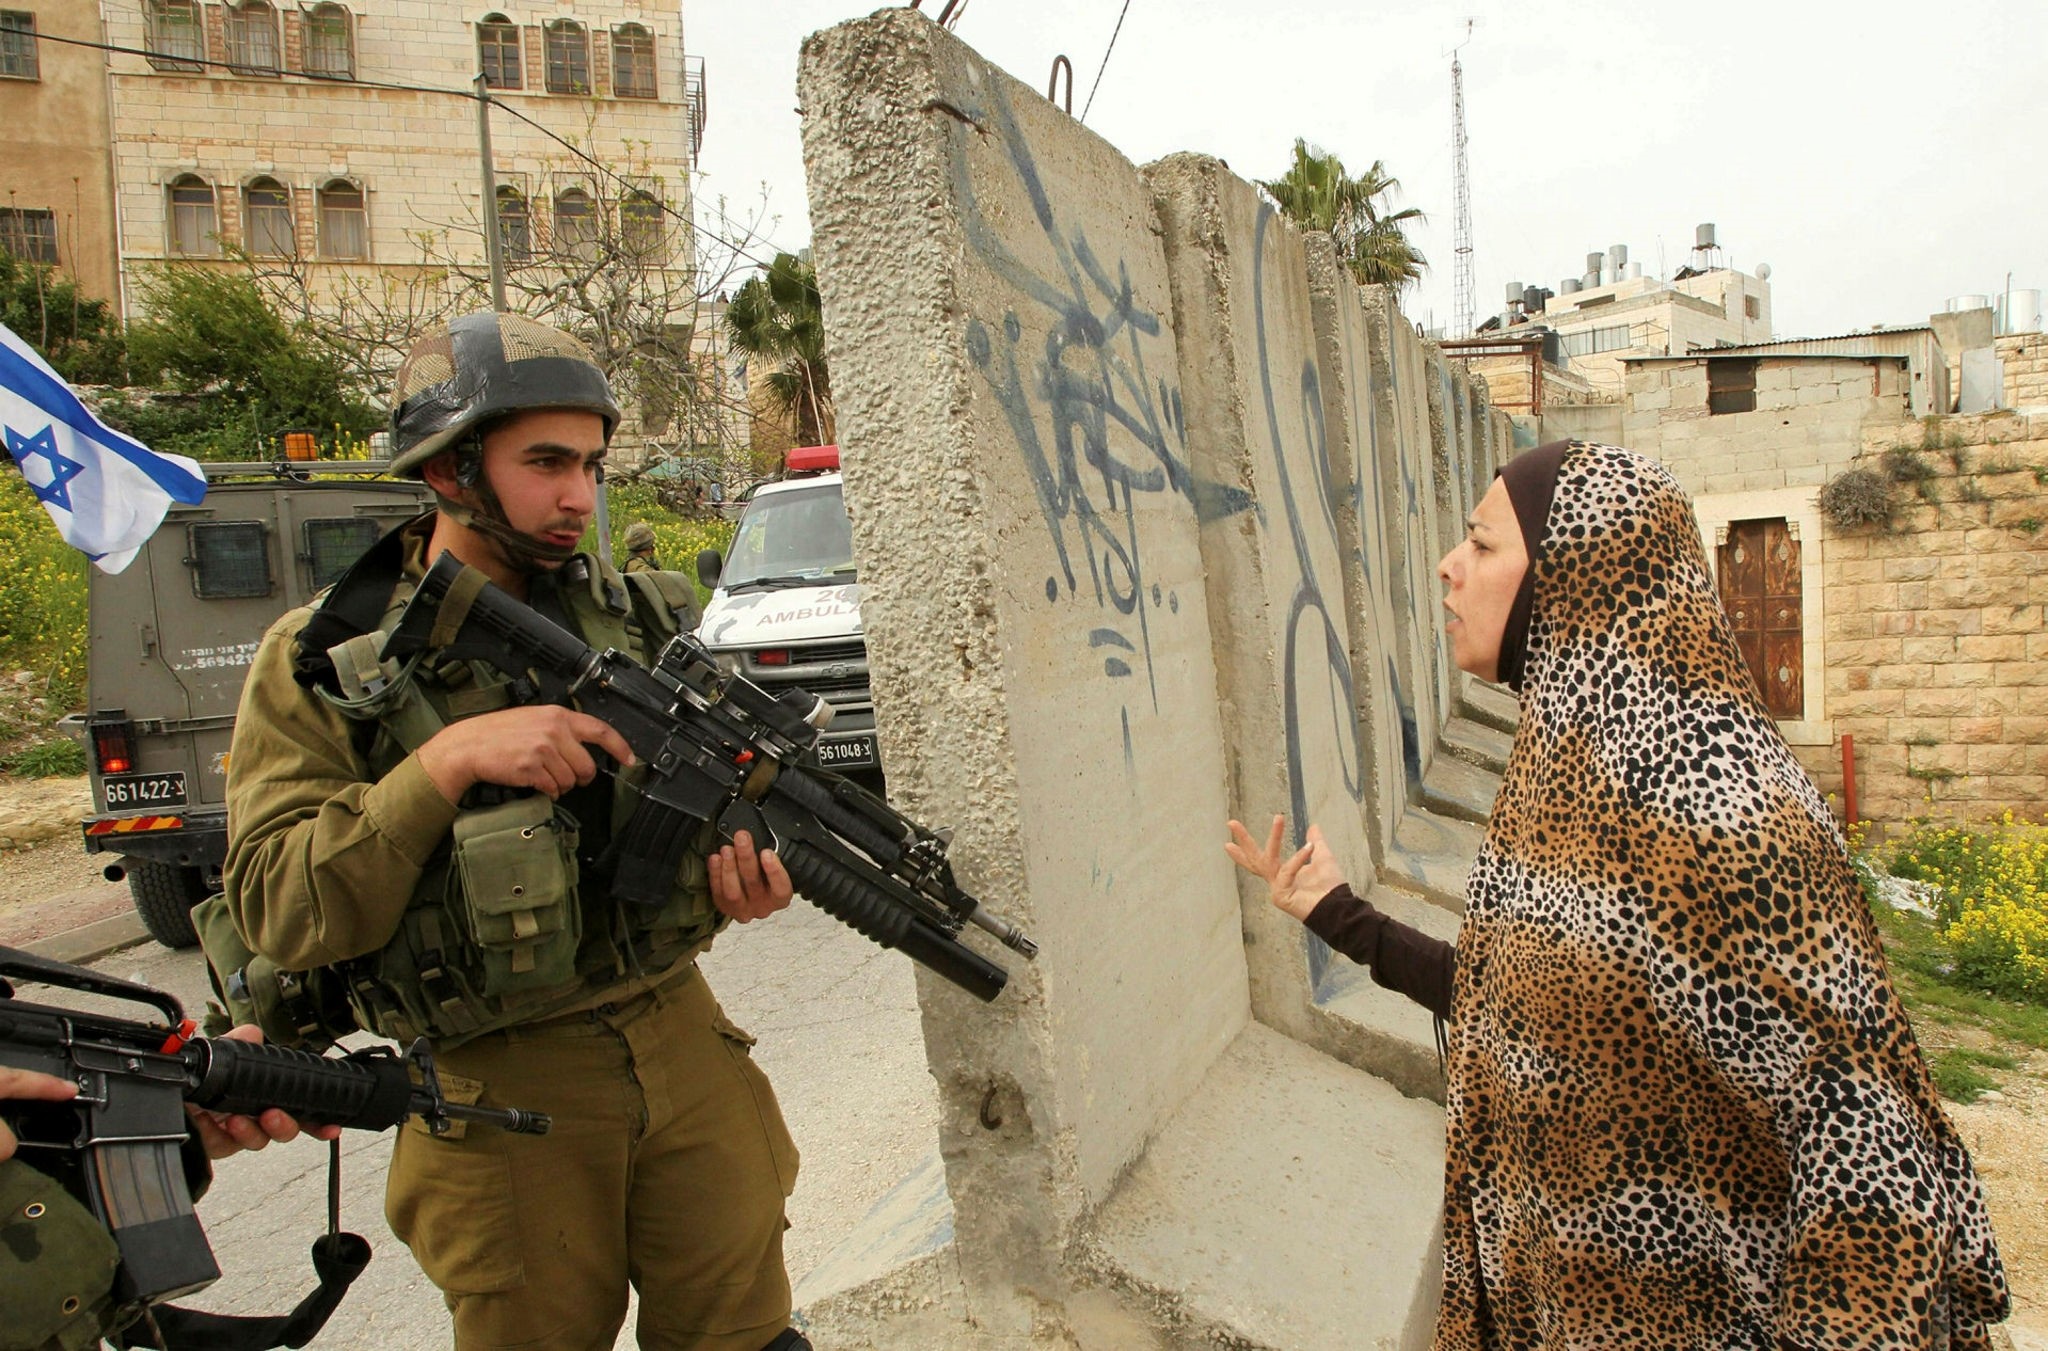 A Palestinian woman speaks with an Israeli soldier at the entrance of the heavily guarded Jewish settler enclave in the city center of the West Bank on March 24.